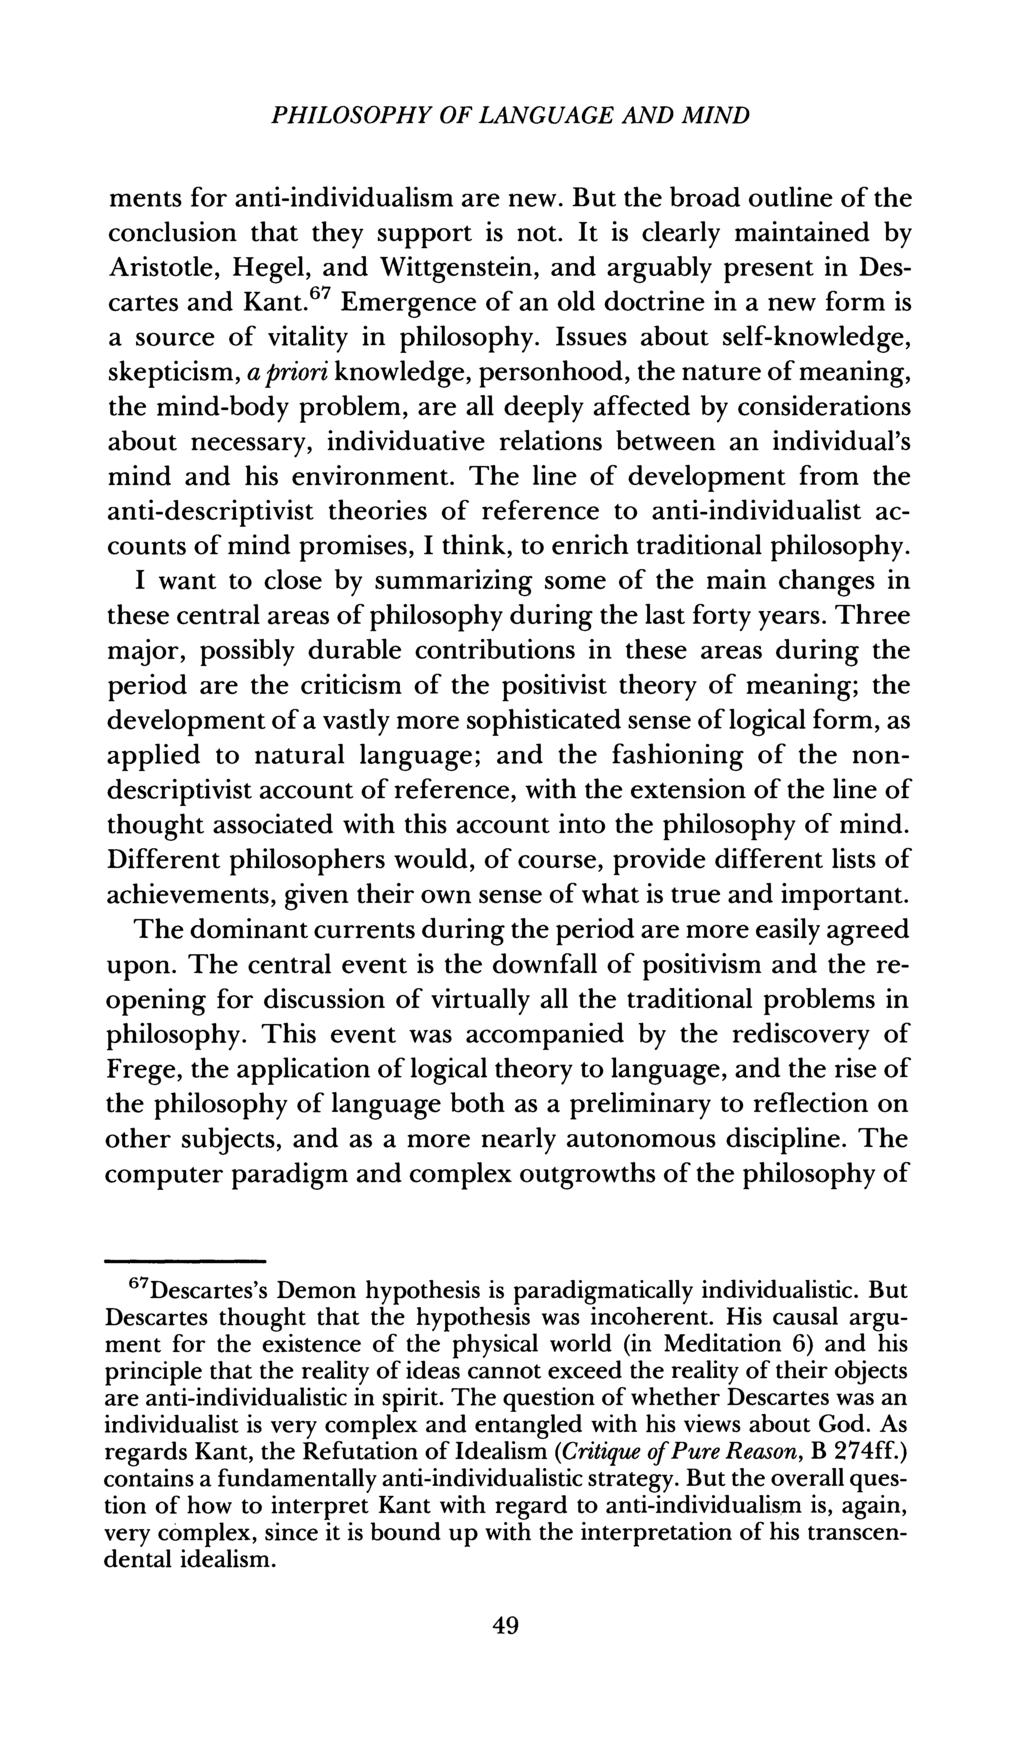 PHILOSOPHY OF LANGUAGE AND MIND ments for anti-individualism are new. But the broad outline of the conclusion that they support is not.